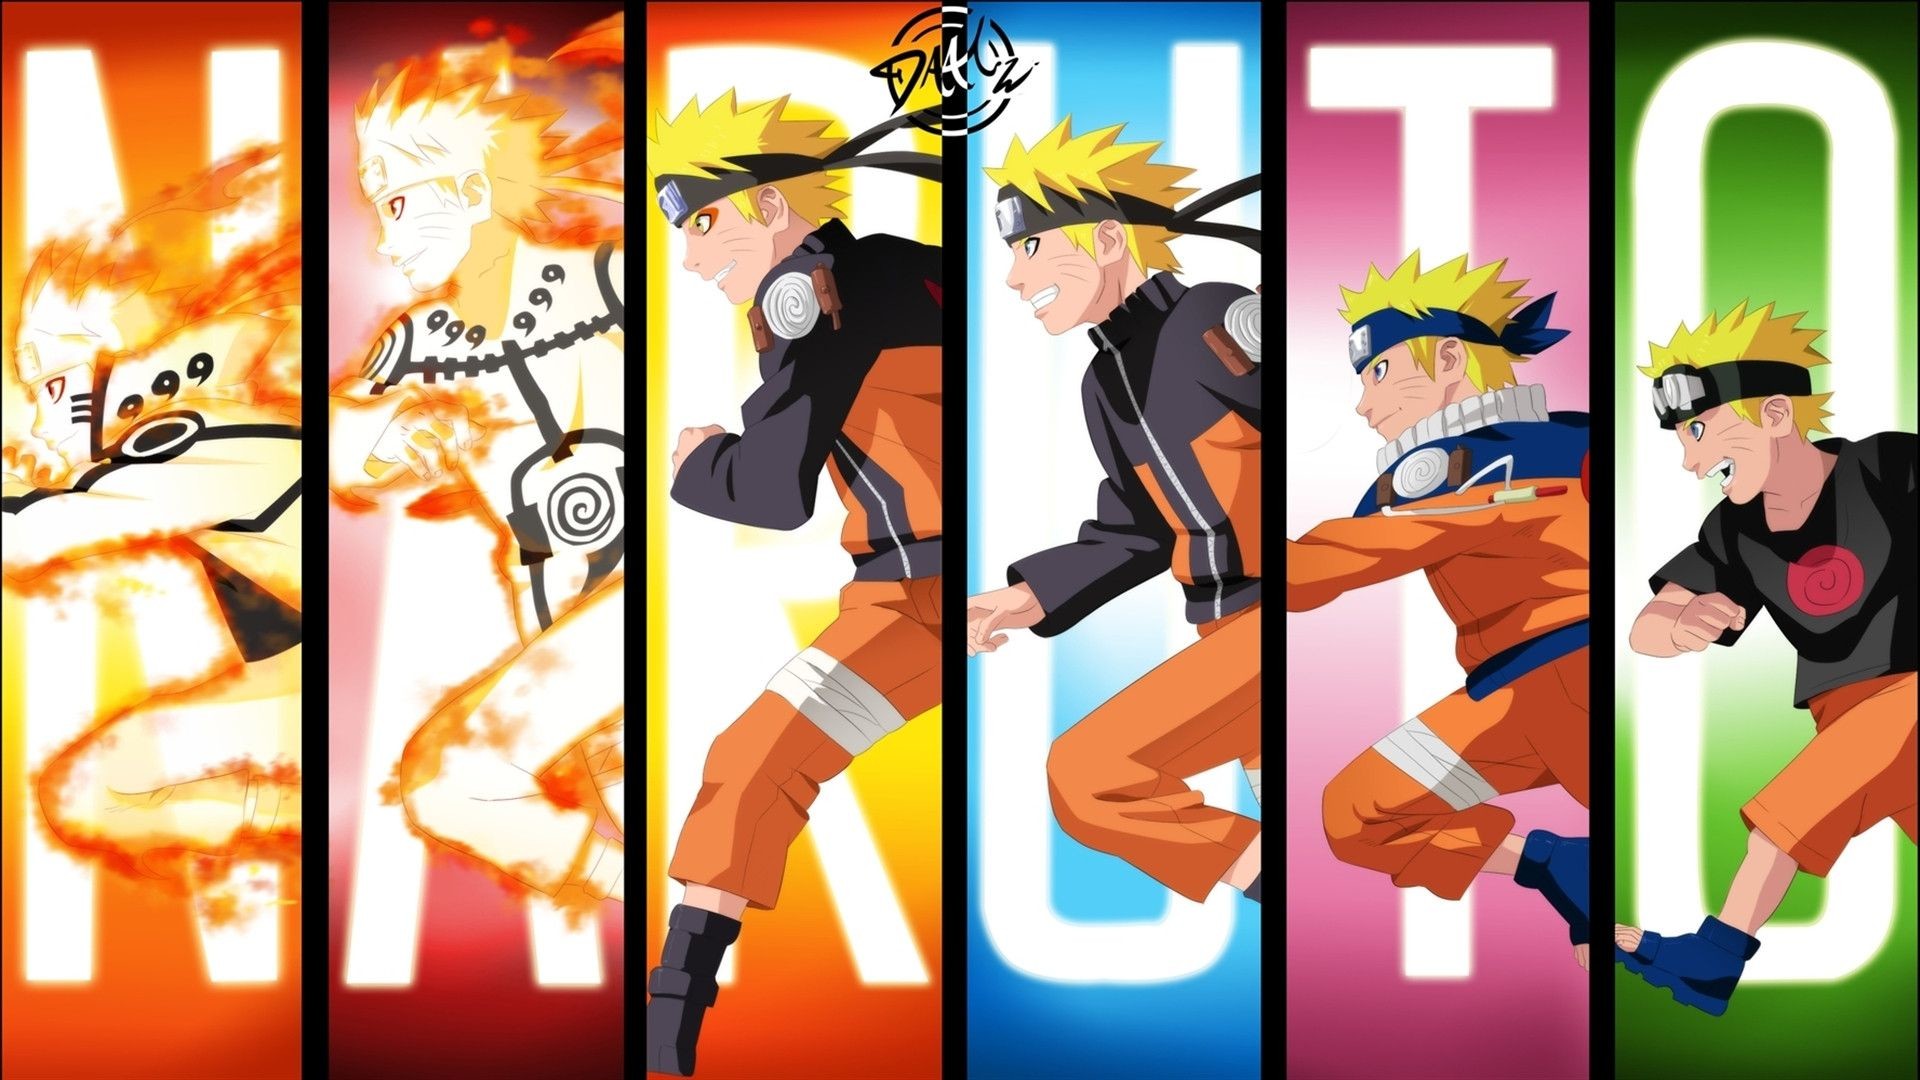 Naruto Cute Wallpaper (56+ pictures)